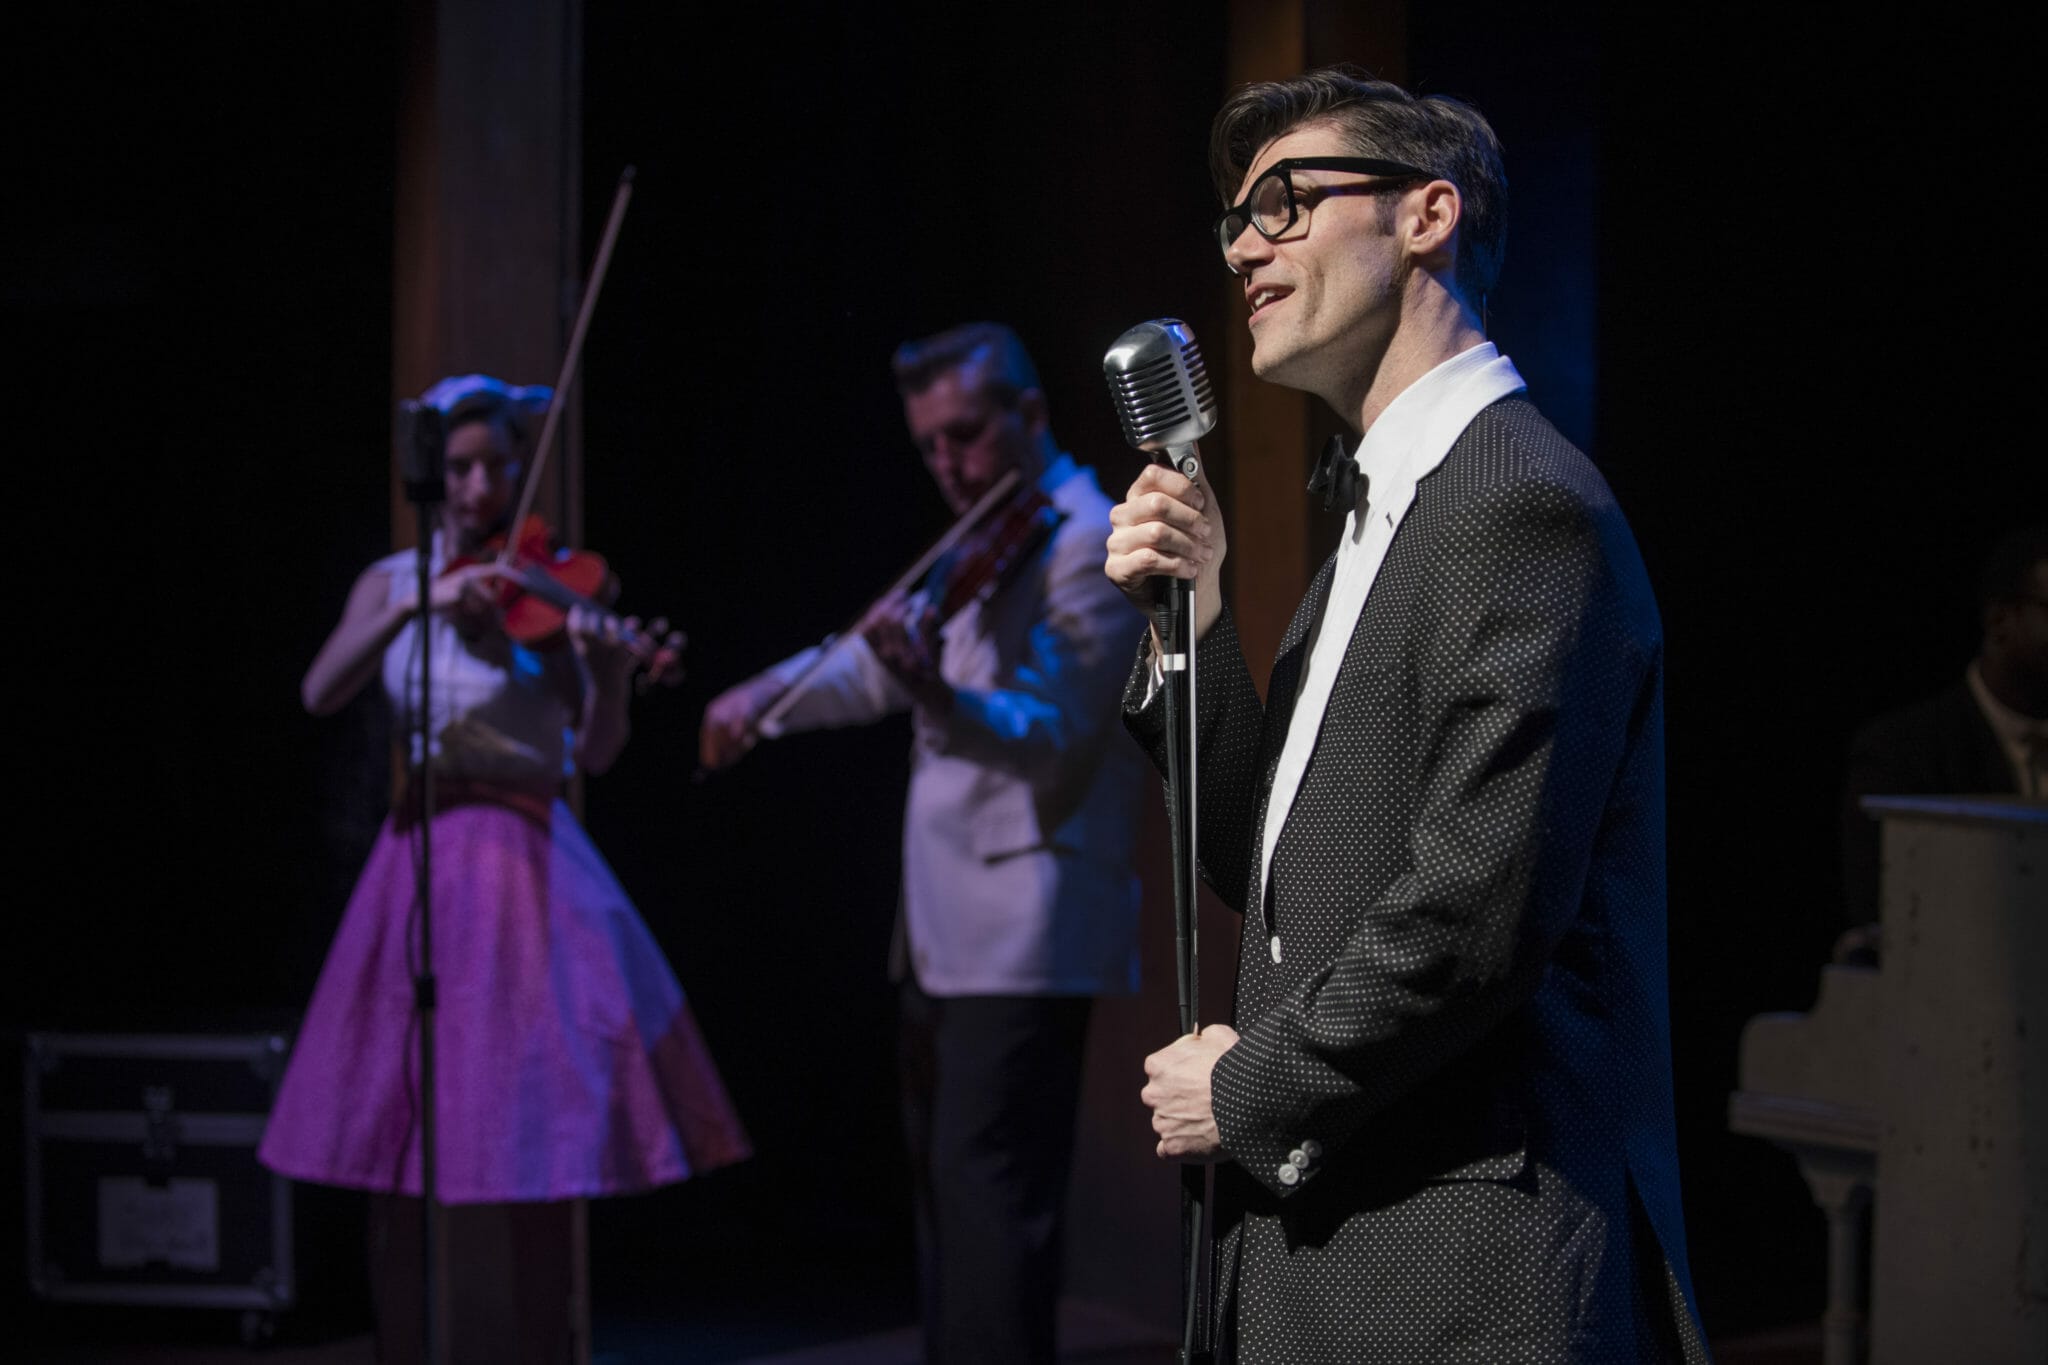 American Blues Theatre Presents BUDDY:THE BUDDY HOLLY STORY